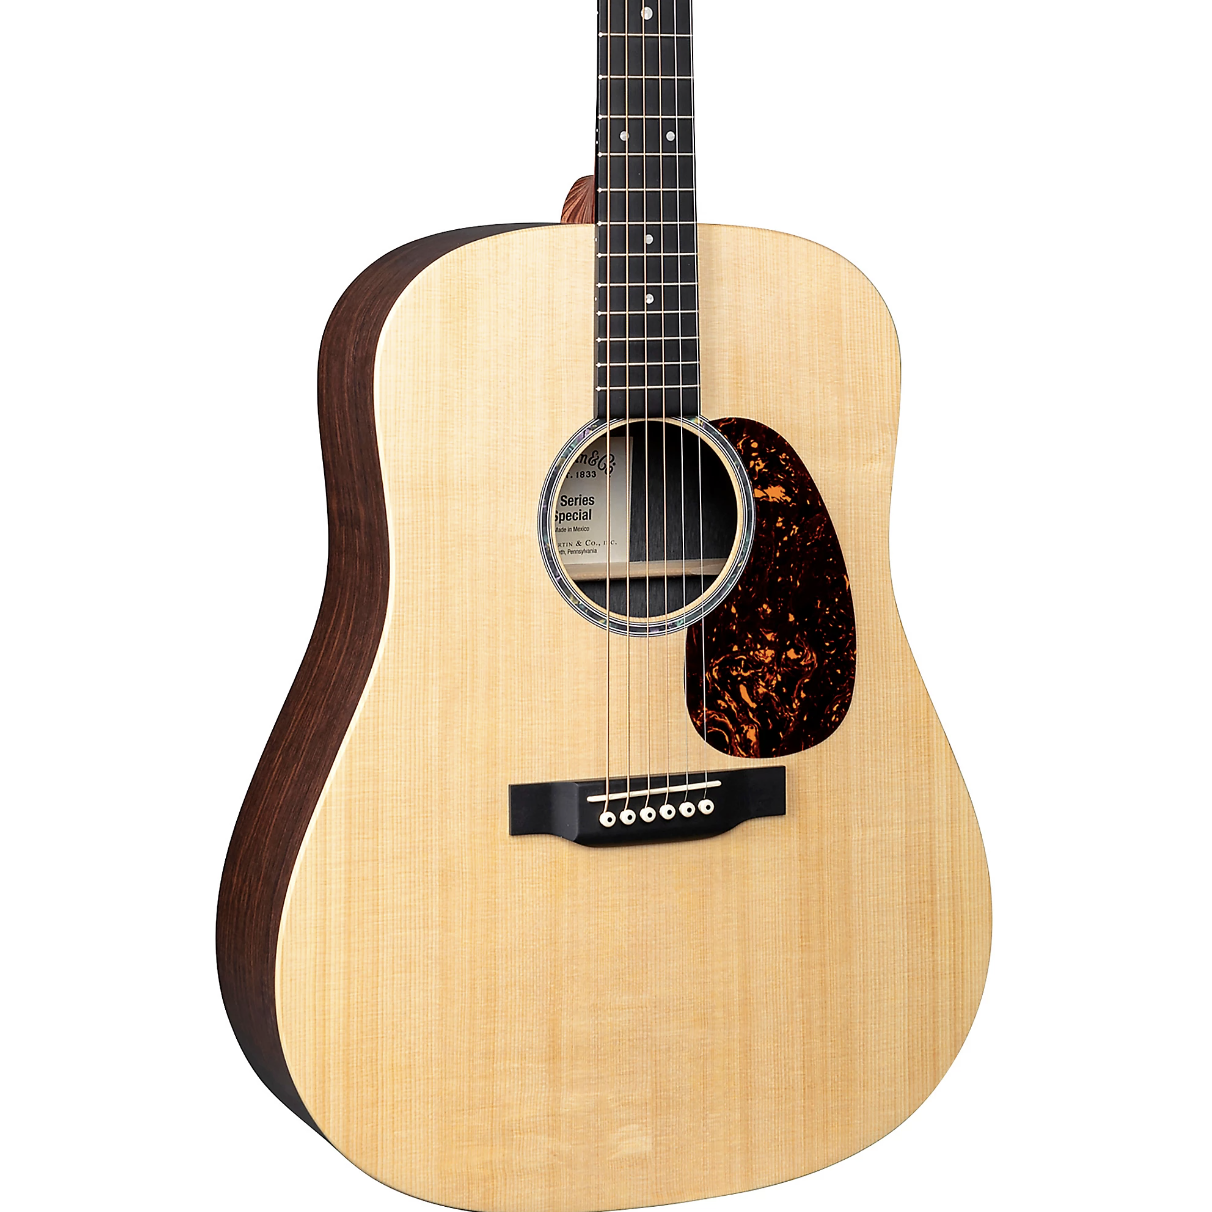 The Full Martin DX1AE Acoustic Electric Guitar Review - Guitar Space